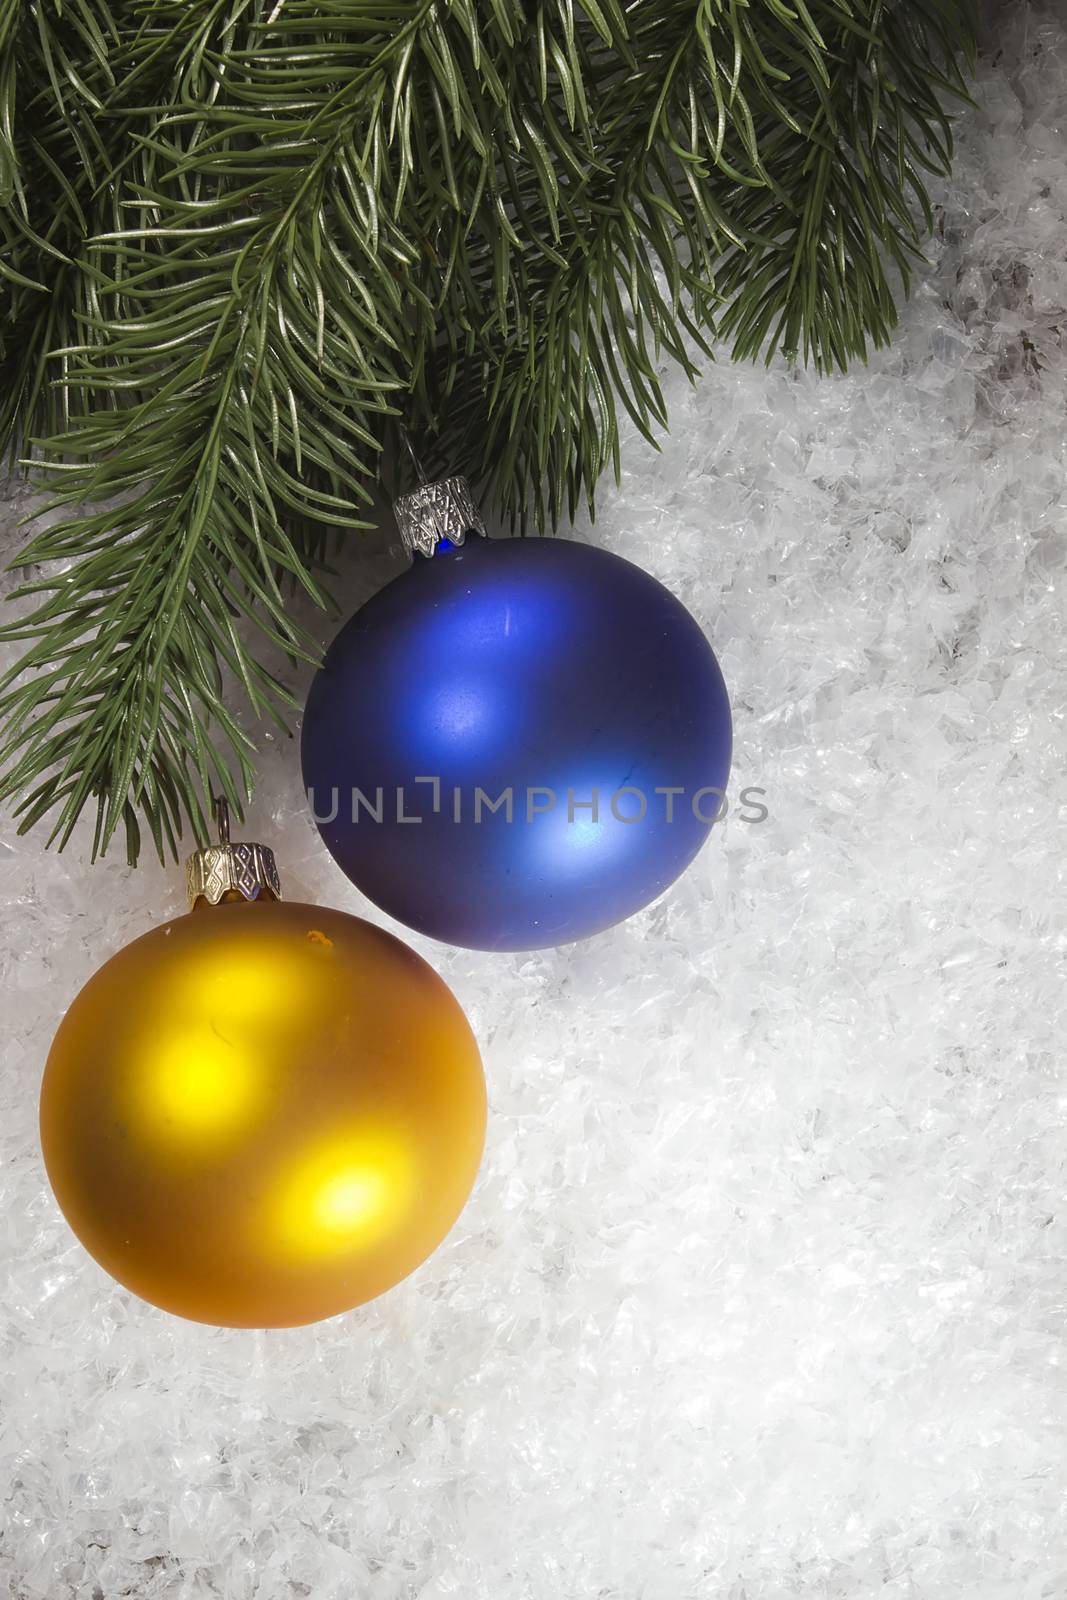 Multicolored balls and fir branch on snow